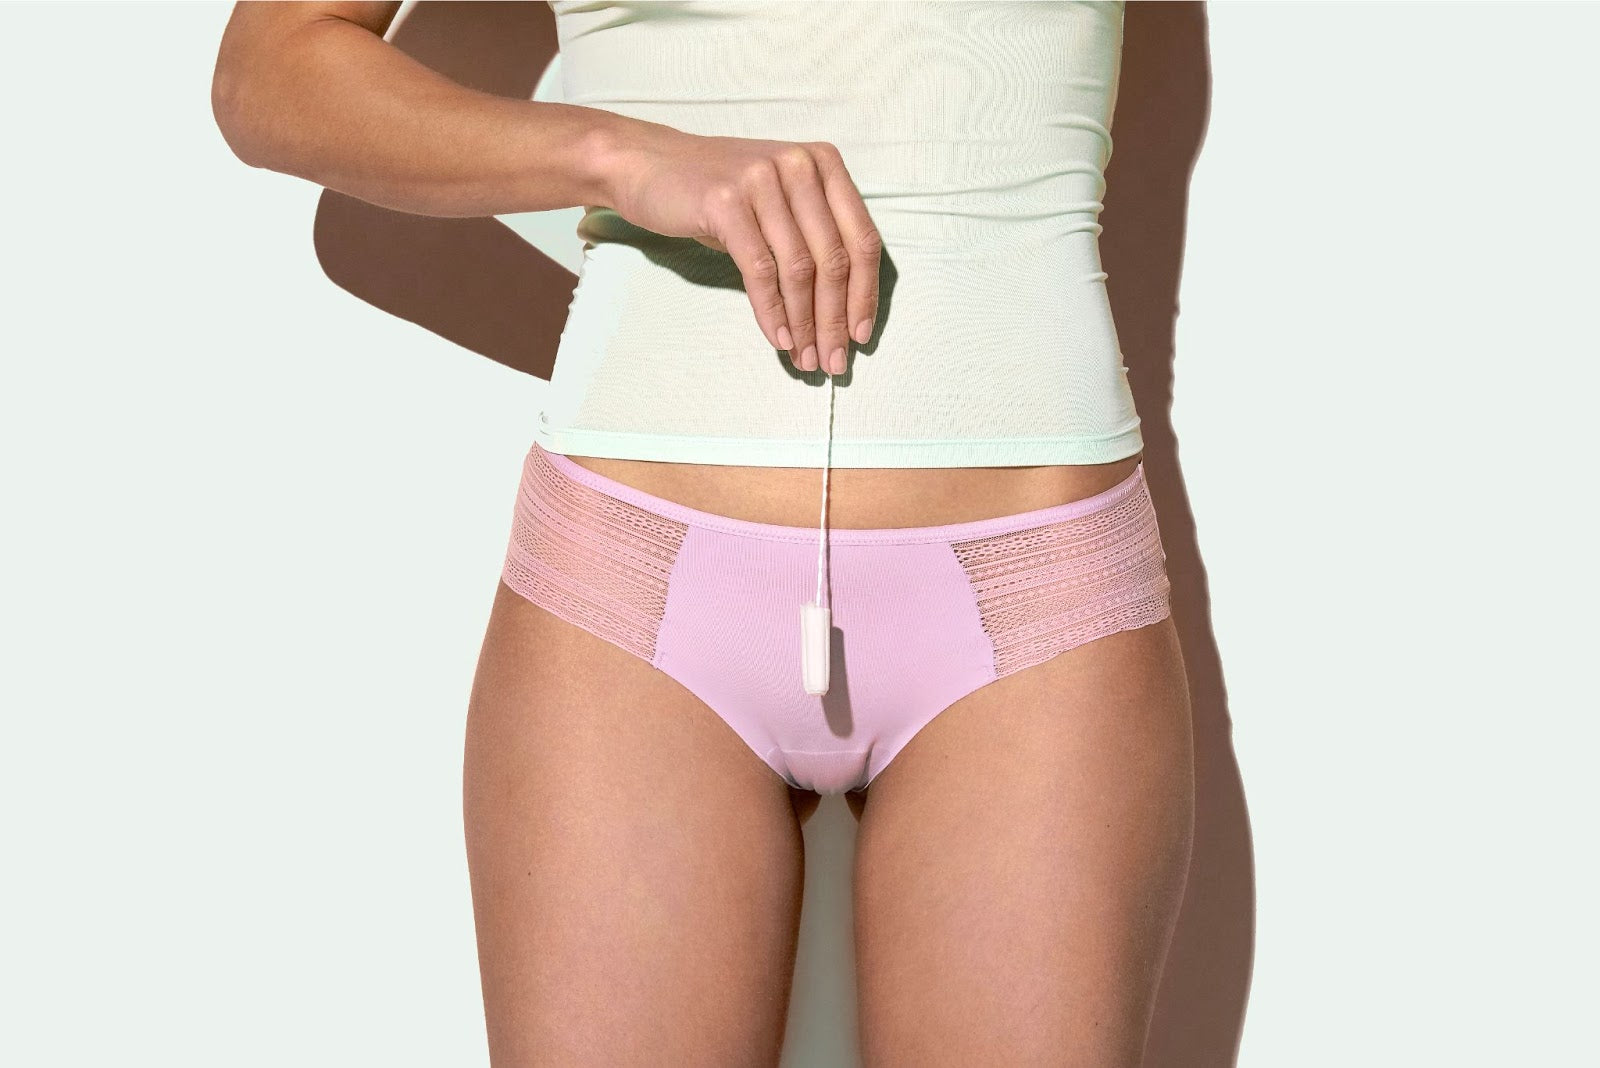 Woman wearing pink underwear holding a tampon.